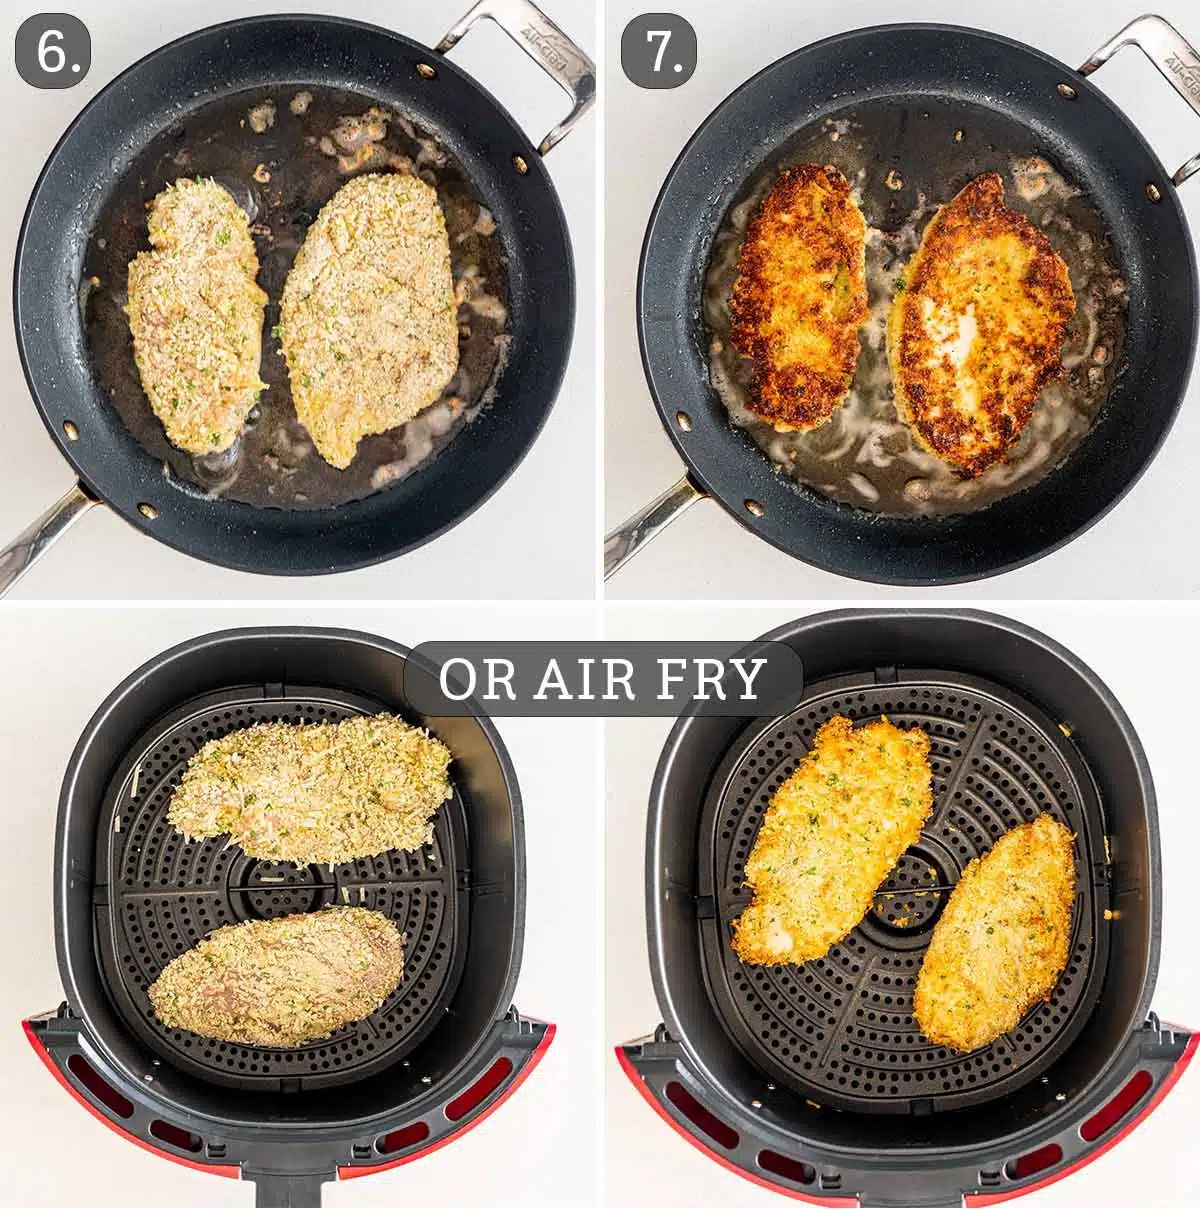 process shots showing how to fry parmesan chicken or cook it in an air fryer.